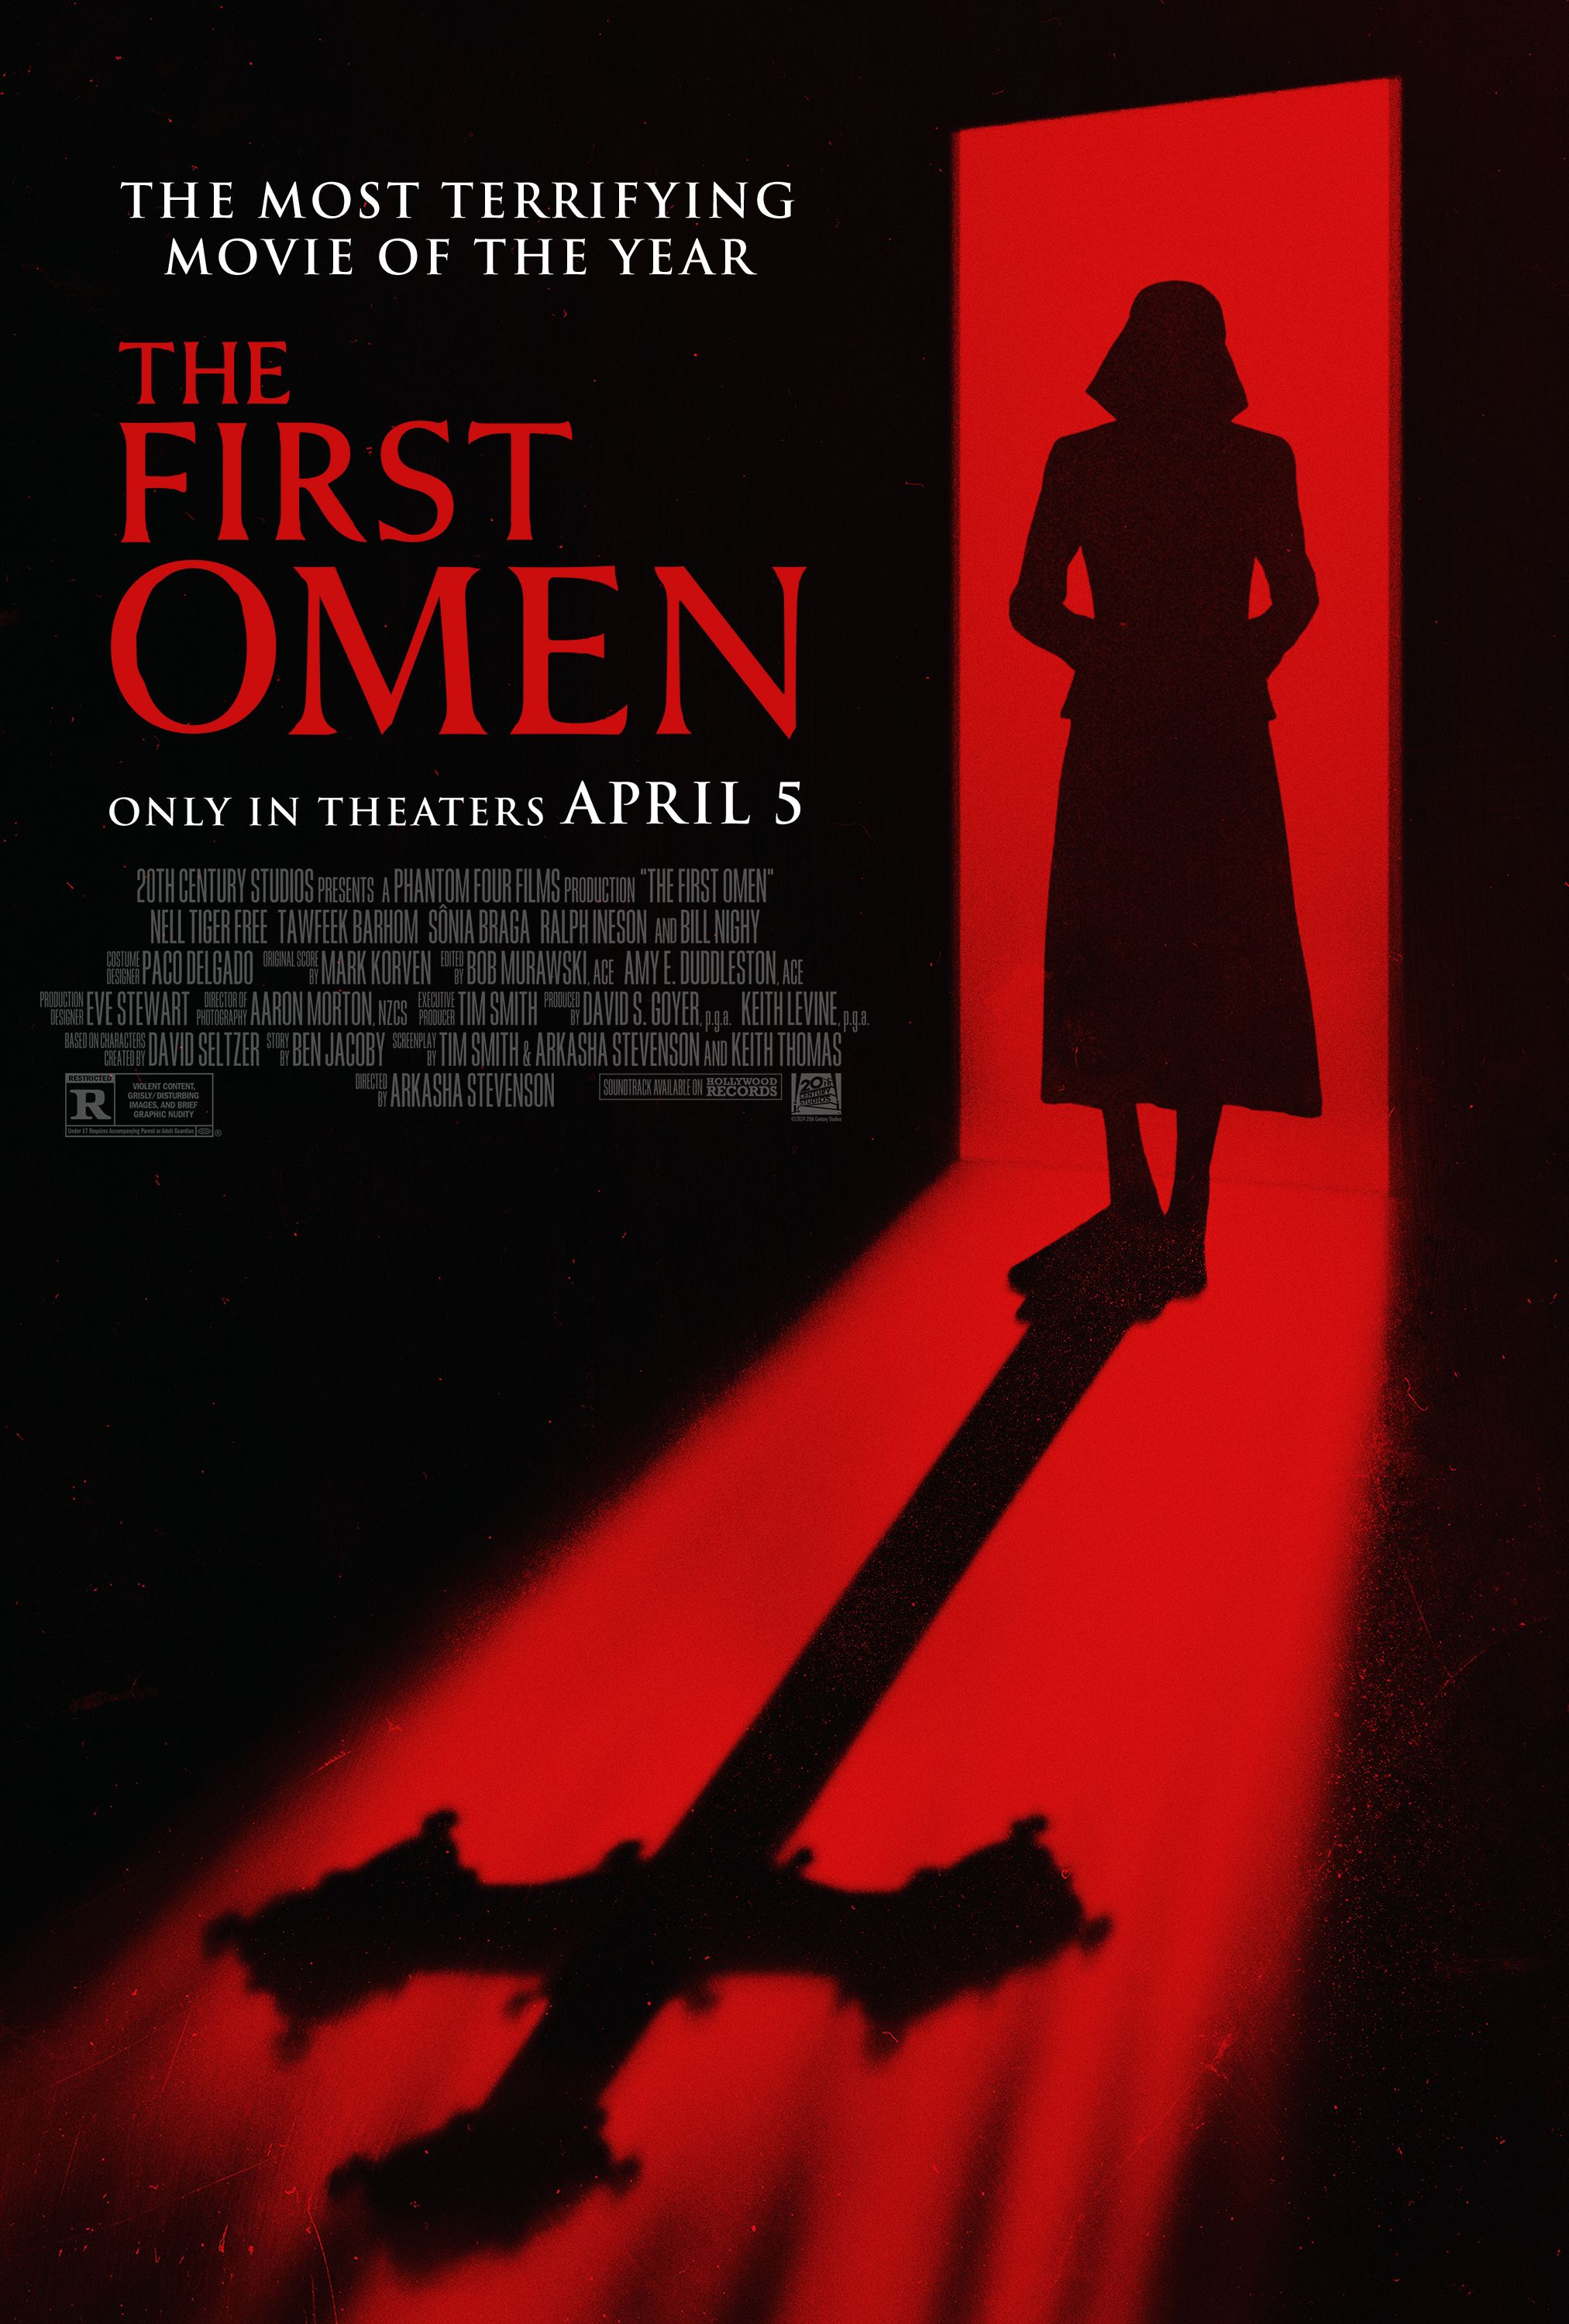 A woman standing in a red doorway with a cross as her shadow on the poster for The First Omen.